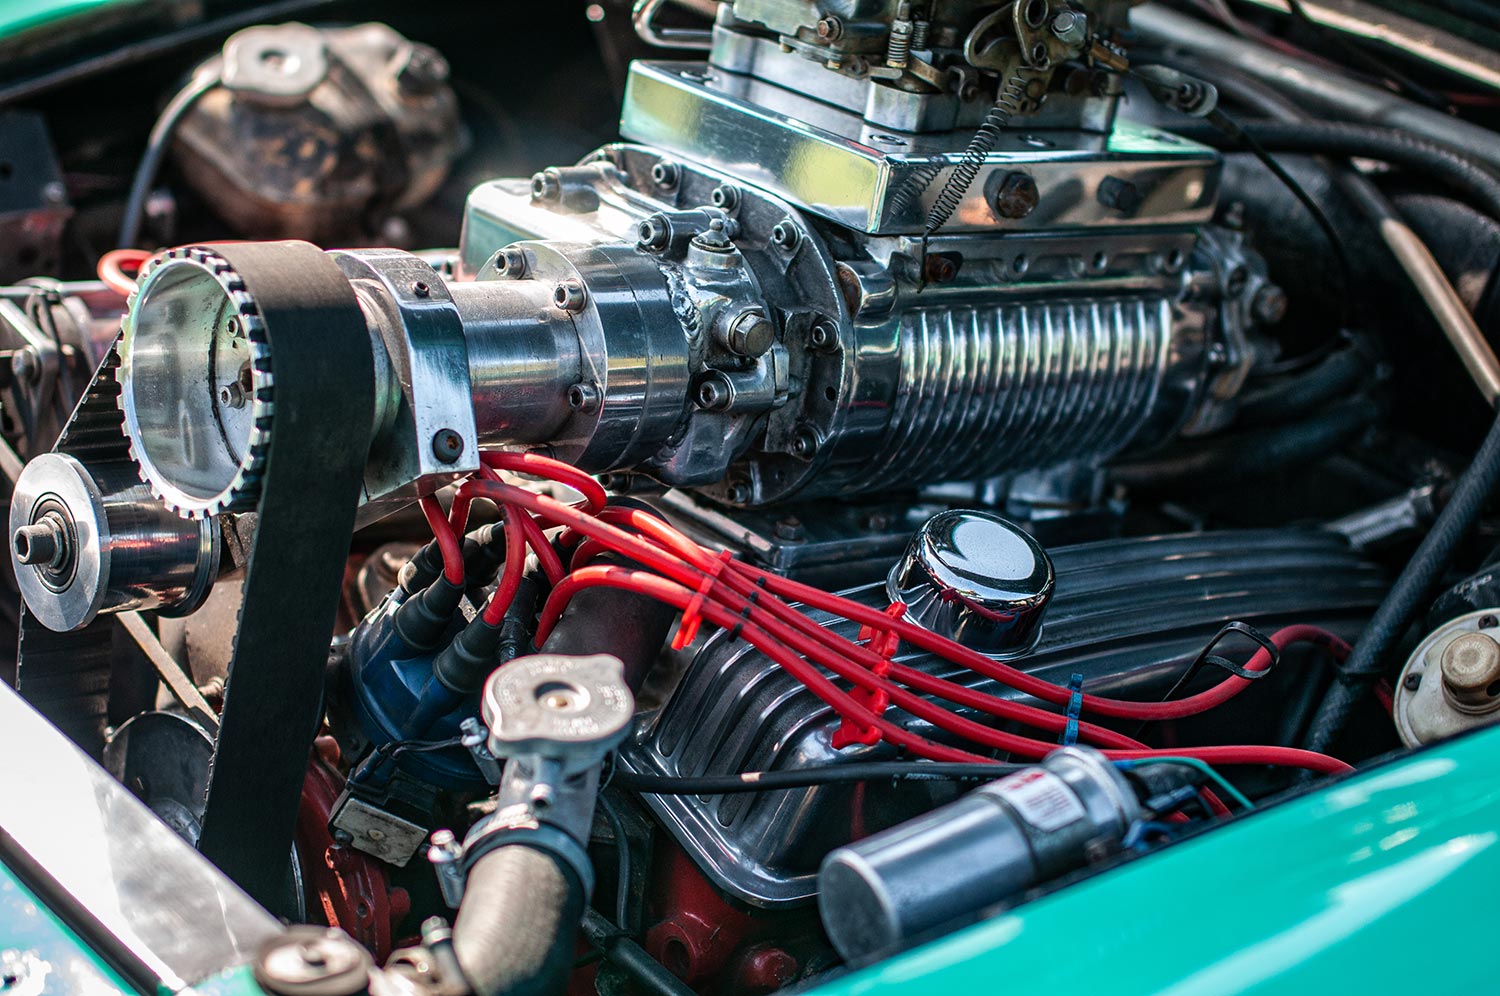 Classic car engine accompanied by a huge supercharger